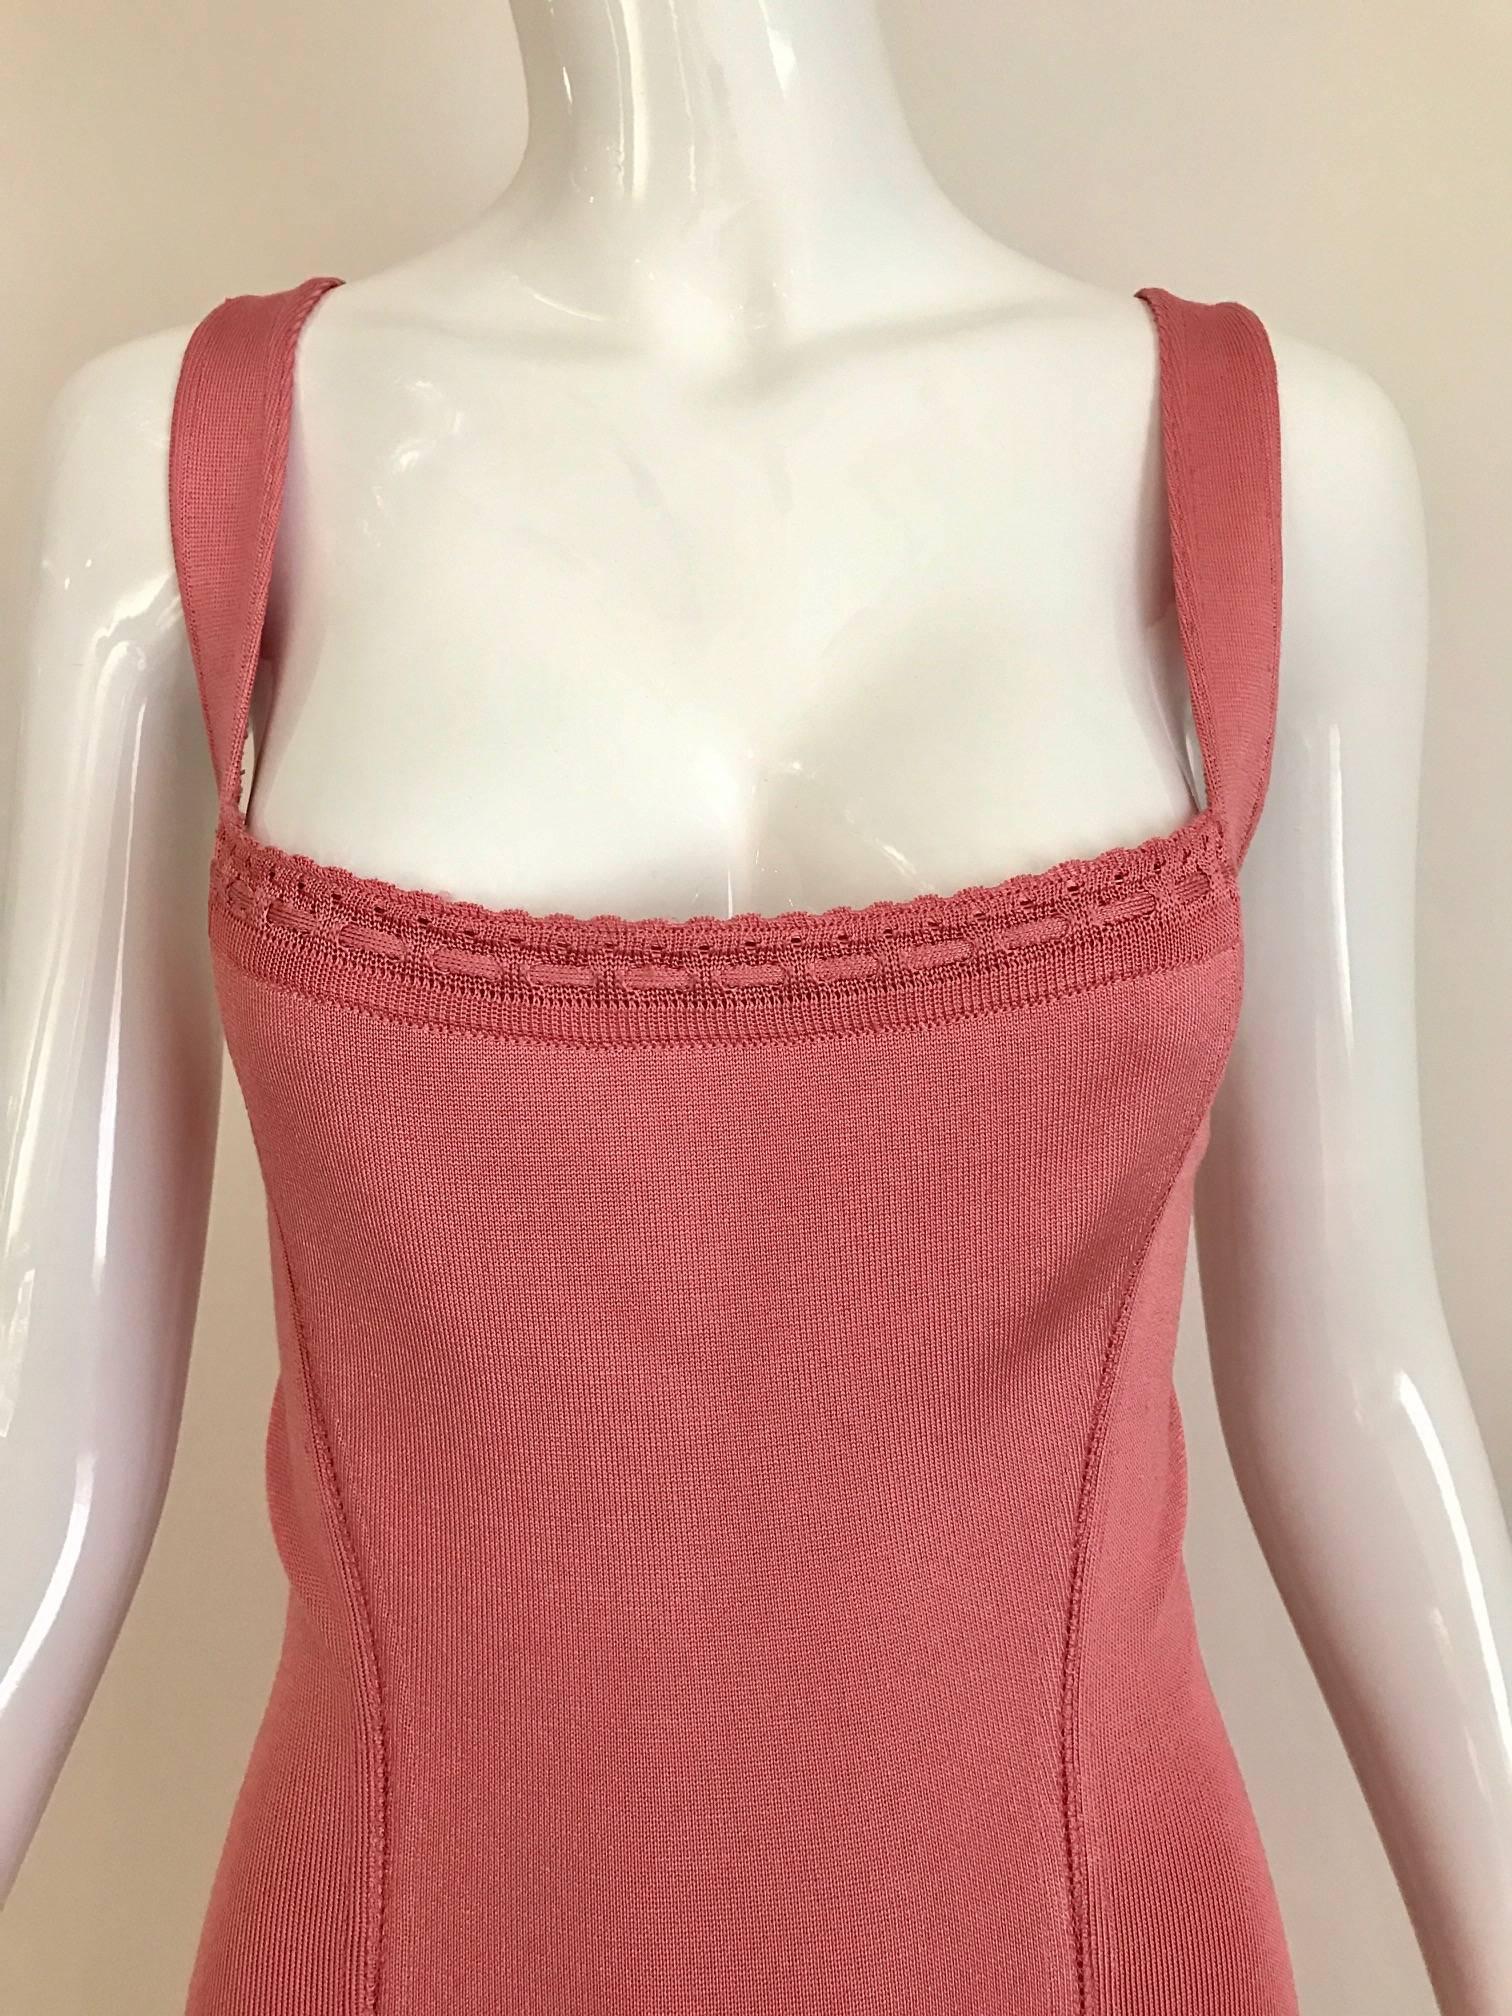 Vintage late 1980s and early 1990s ALAIA  sexy body con  racer back knit fitted dress in coral pink sorbet color. Classic ALAIA! Small- Medium
Measurement: ( some stretch)
Bust: 32 -  36 inch 
Waist: 24 - 30 inch
Hip: 30 - 36 inch / Dress length